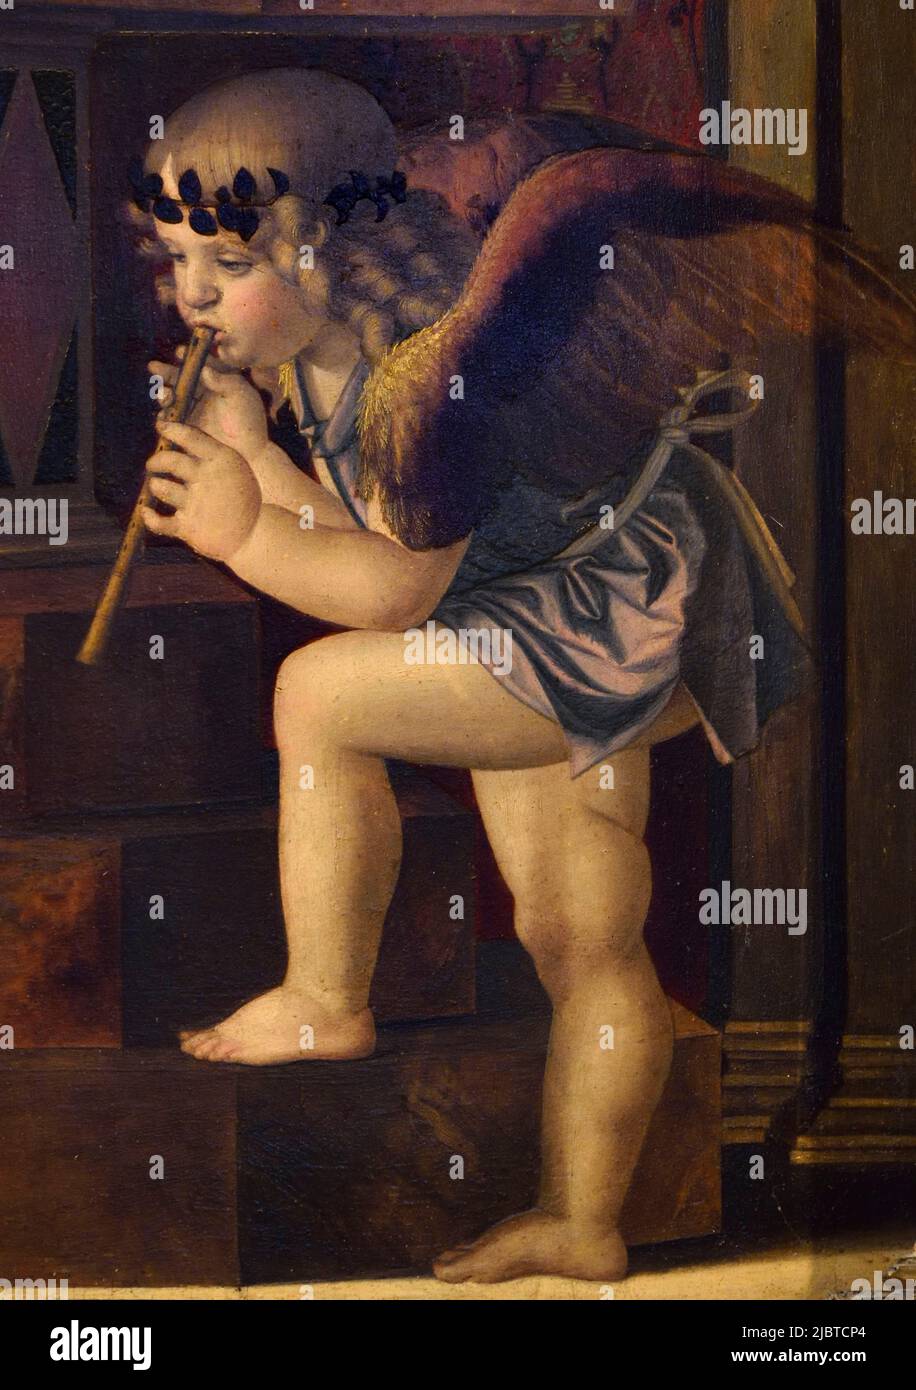 Italy, Venetia, Venice, listed as World Heritage by UNESCO, San Polo district, Basilica Santa Maria Gloriosa dei Frari, Angel playing flute under the throne of the Madonna and Child, Painting by Giovanni Bellini Stock Photo